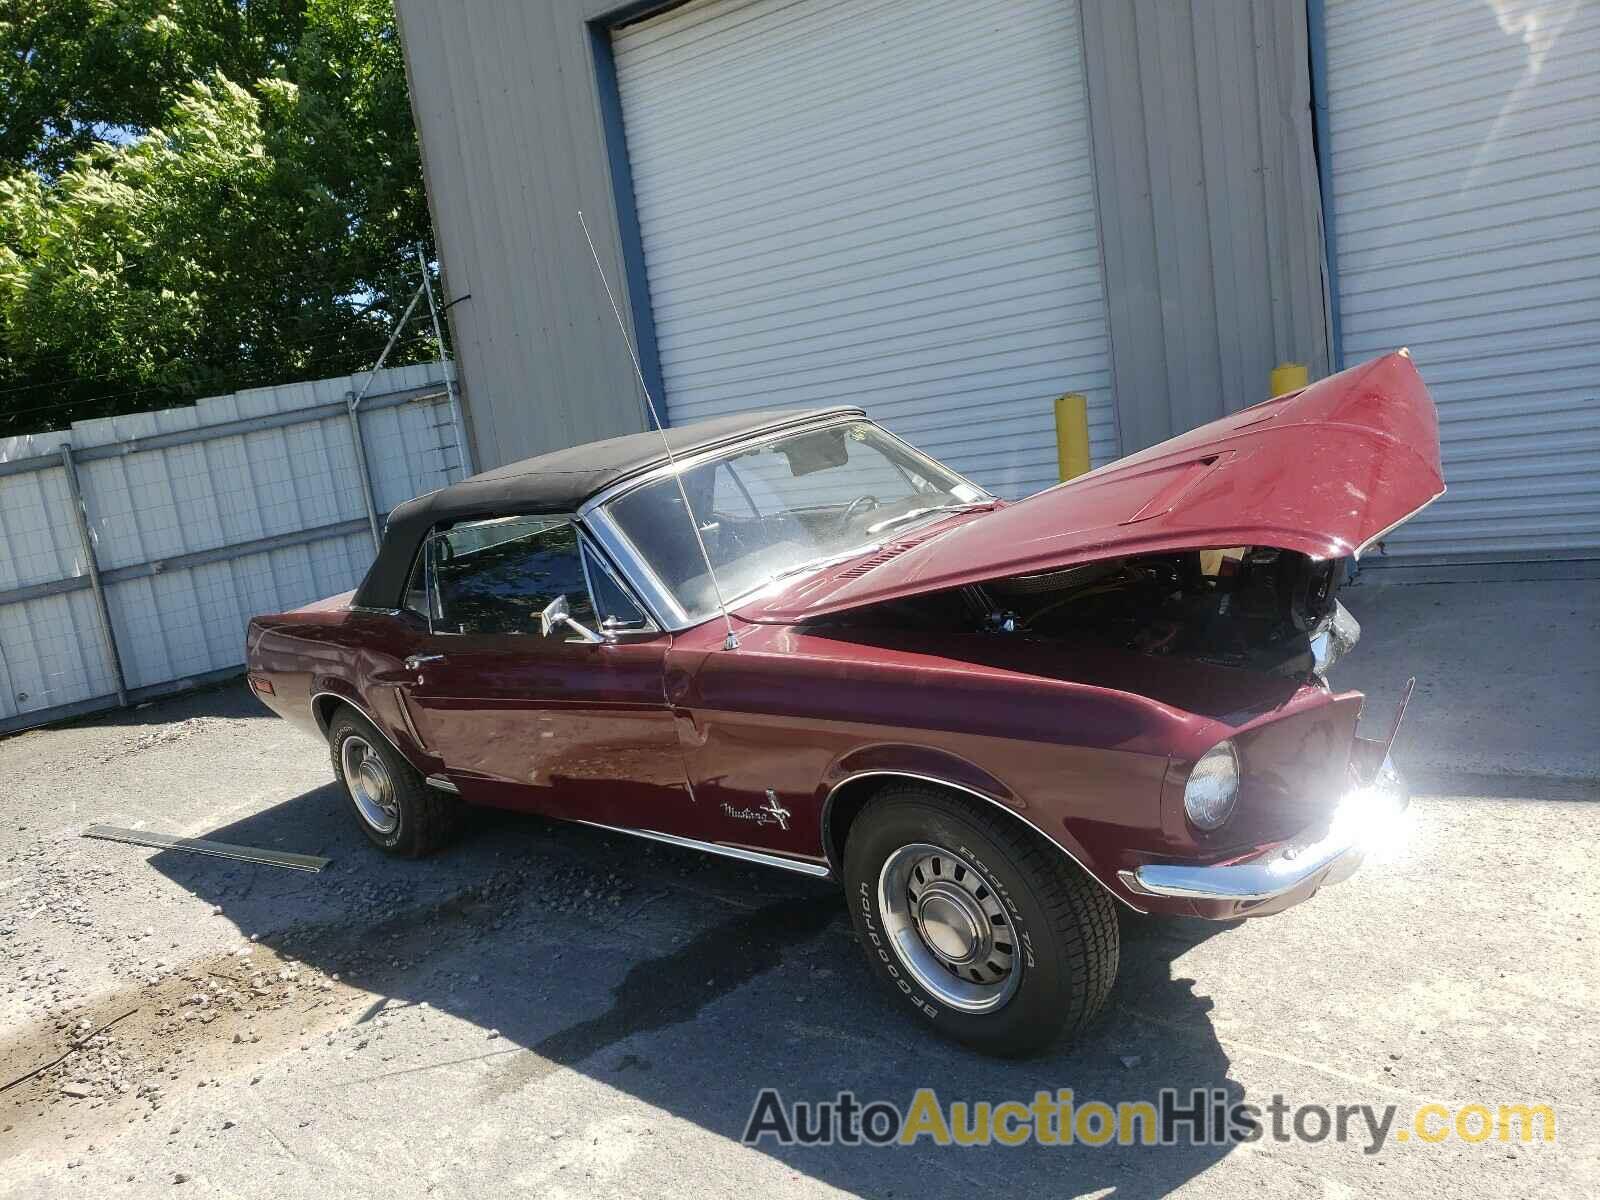 1968 FORD MUSTANG, 8T03C159899